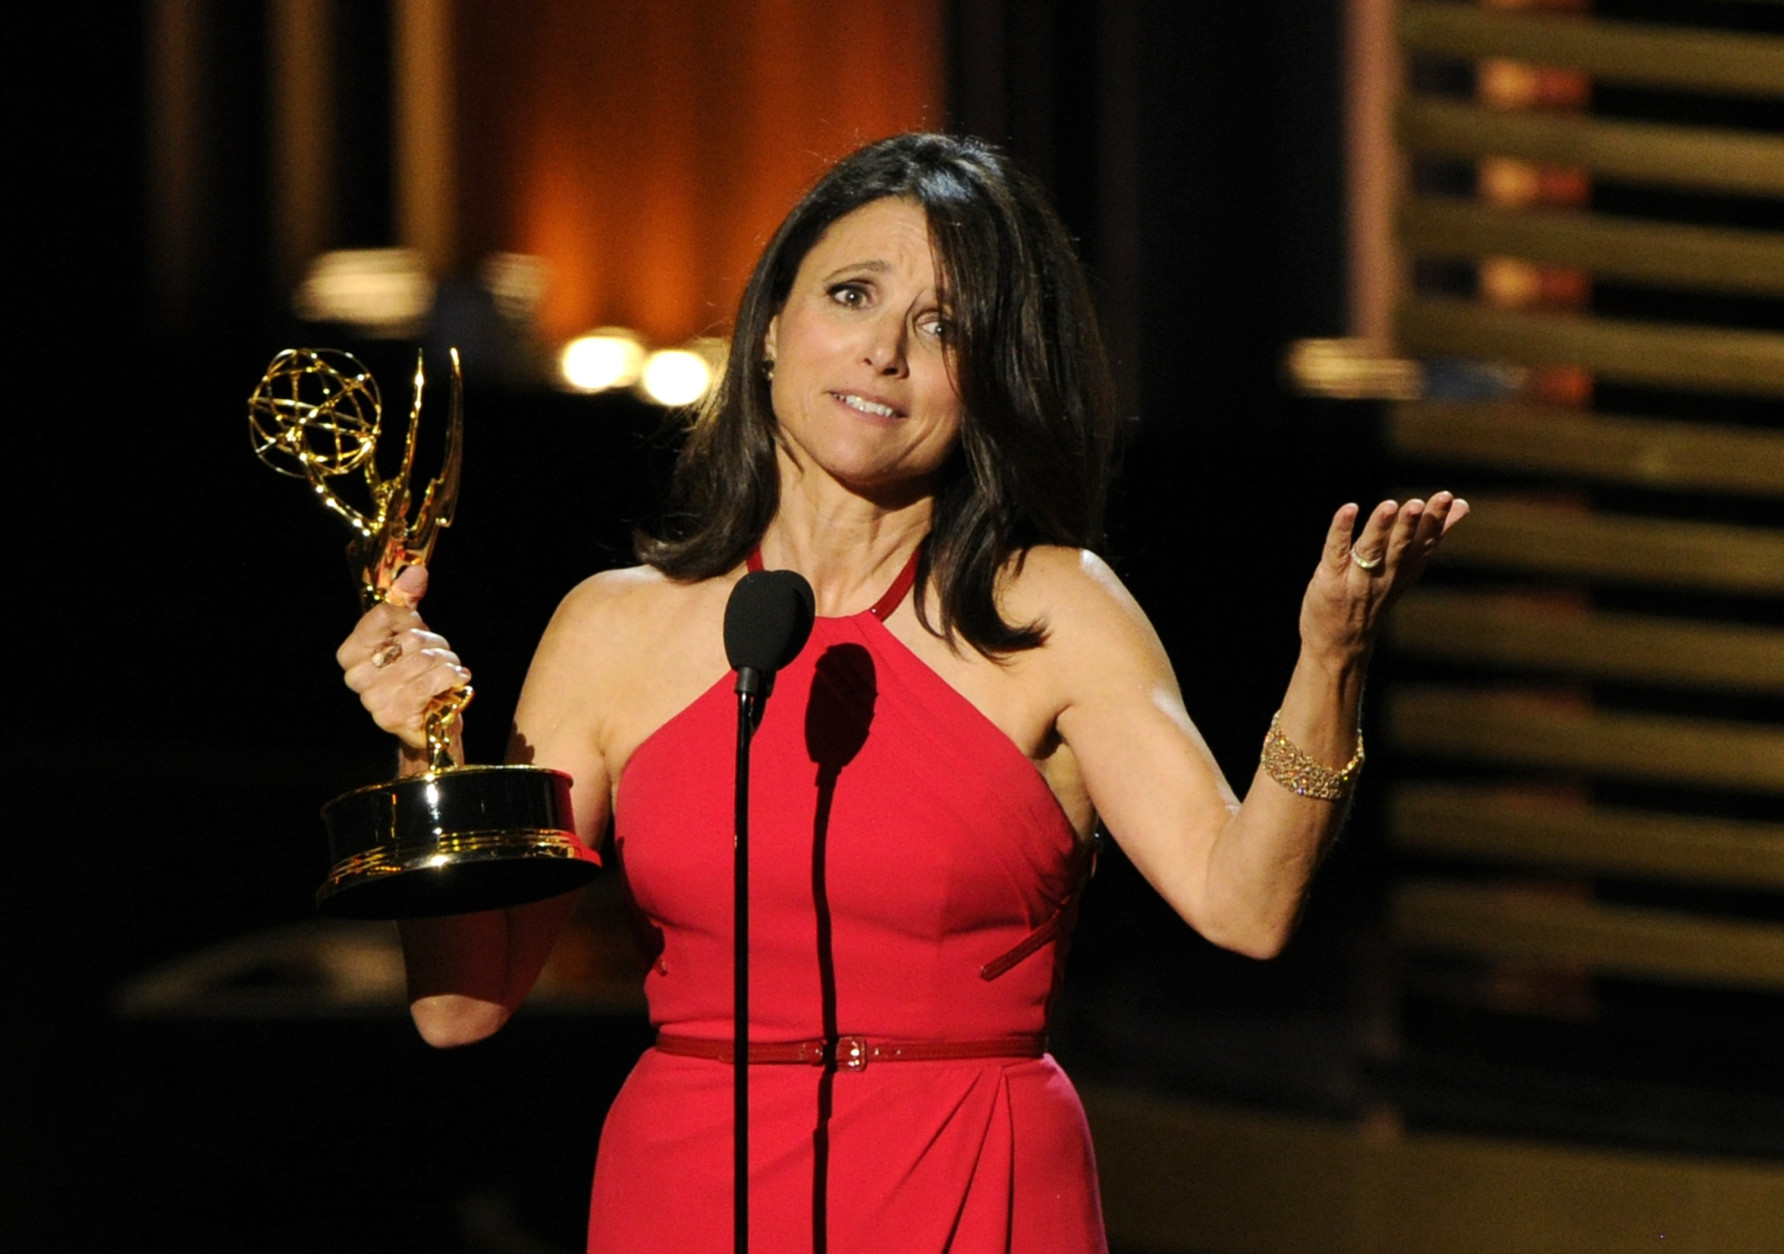 Julia Louis-Dreyfus accepts the award for outstanding lead actress in a comedy series for her work on Veep at the 66th Annual Primetime Emmy Awards at the Nokia Theatre L.A. Live on Monday, Aug. 25, 2014, in Los Angeles. (Photo by Chris Pizzello/Invision/AP)